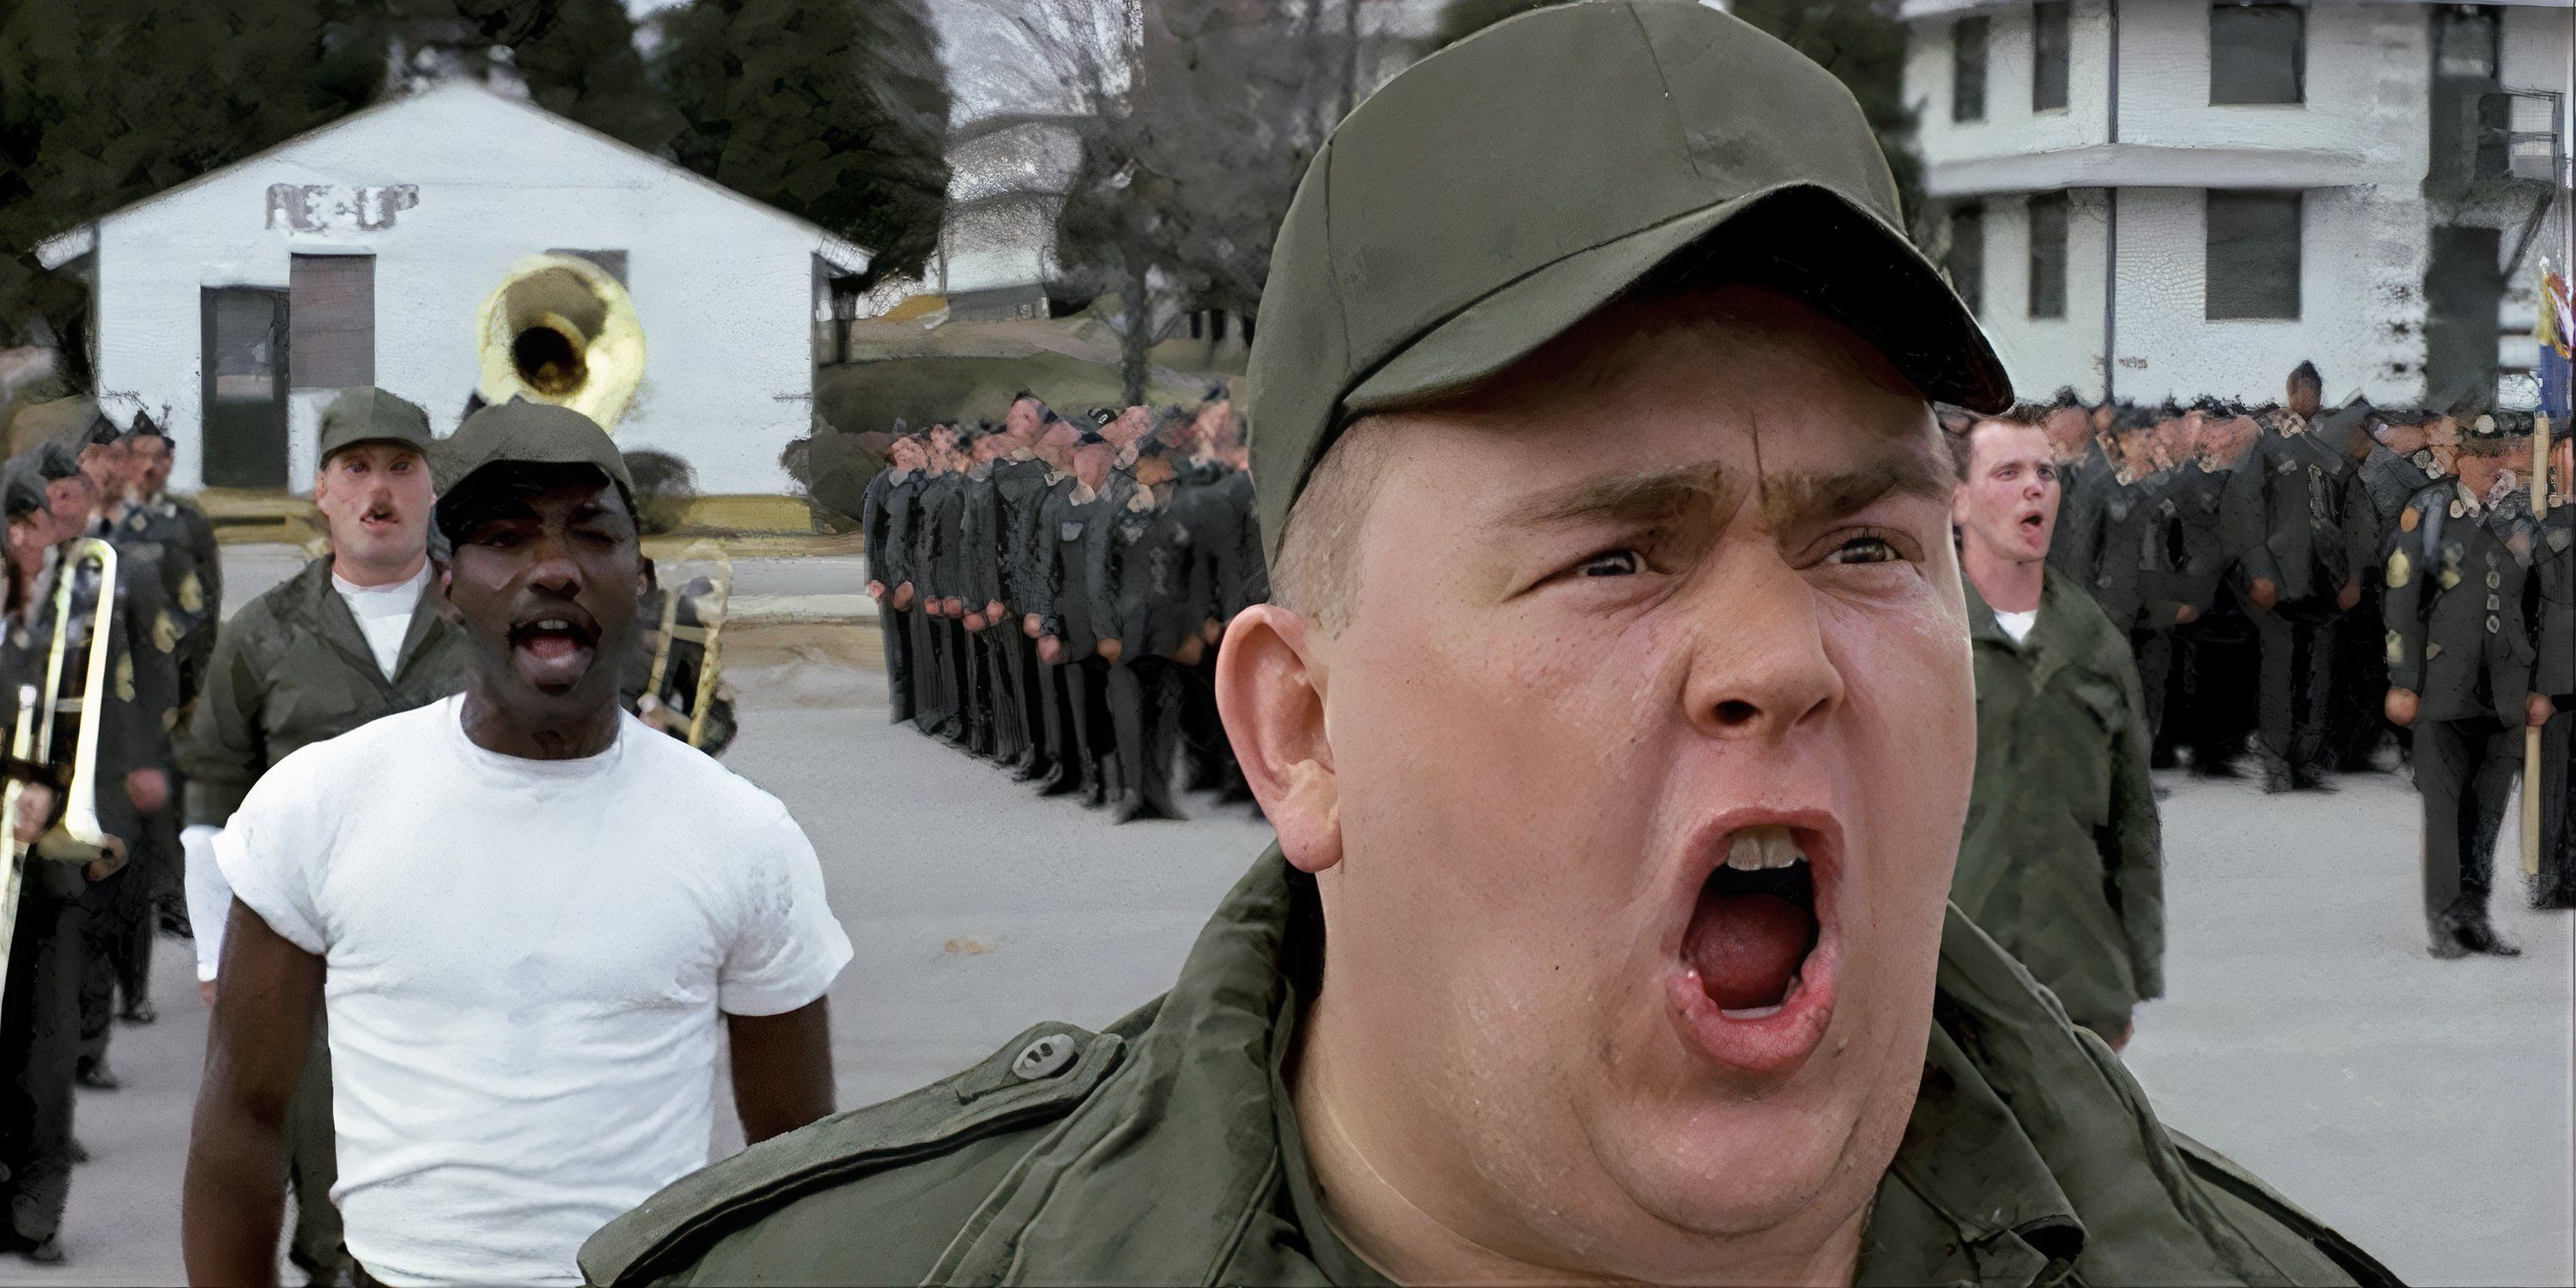 John Candy in military fatigues, yelling with the rest of the unit behind him in Stripes.